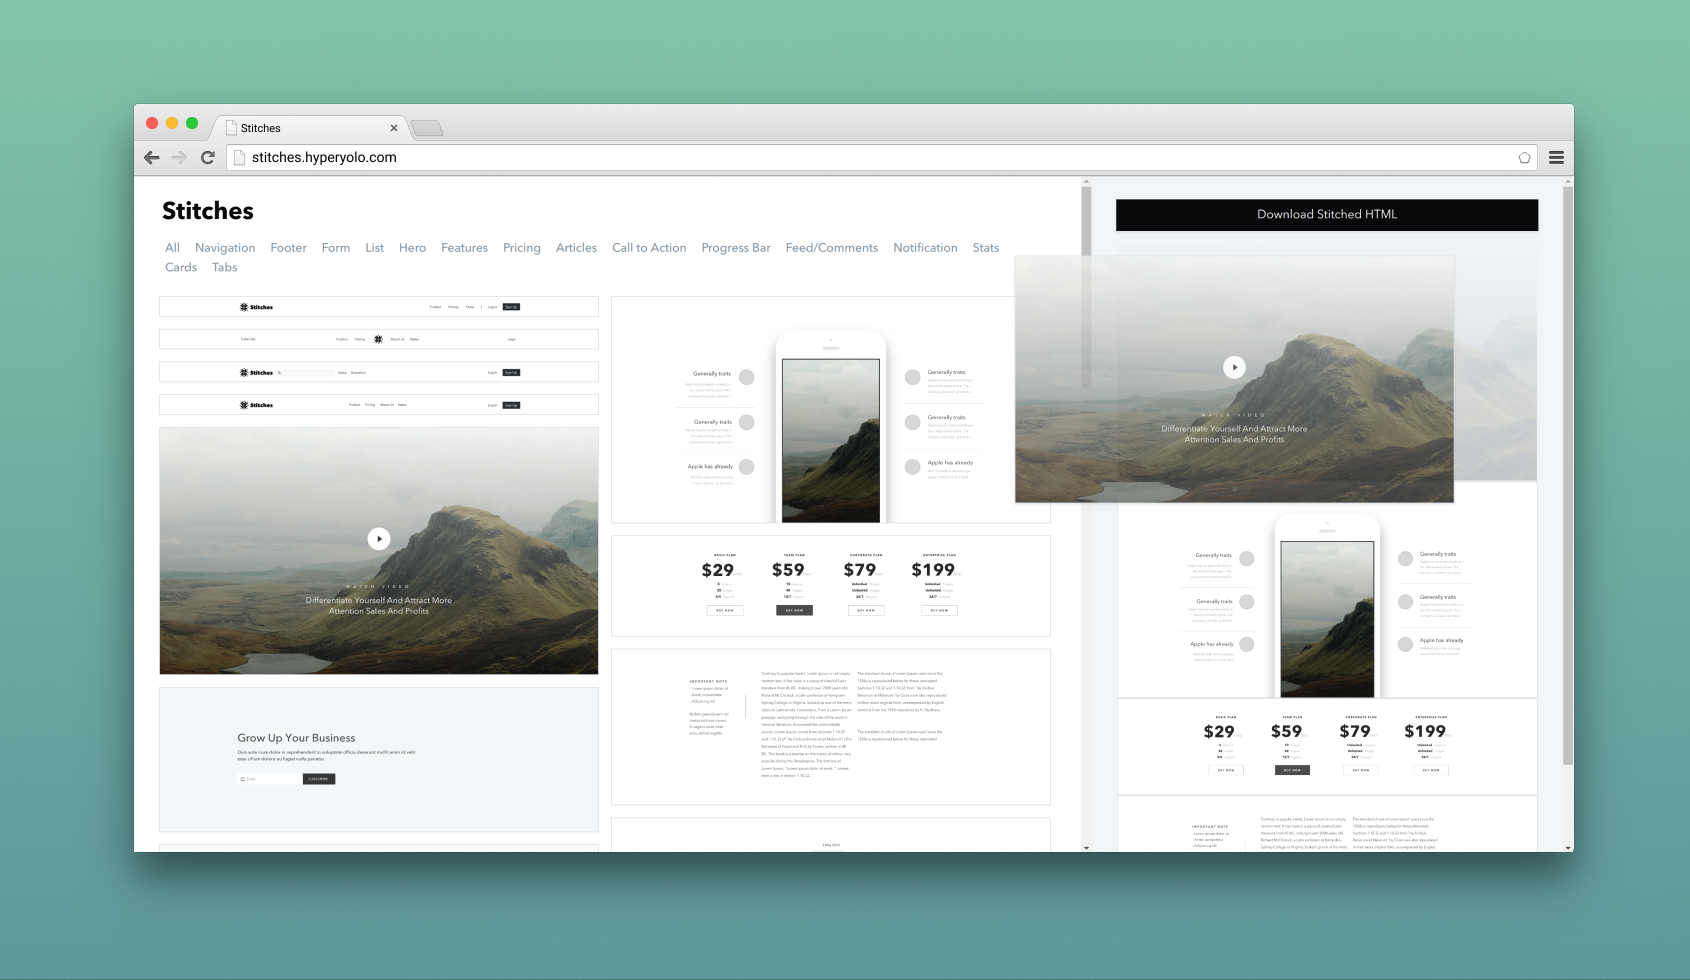 Building HTML template with tailwind.css | by Amie | Prototypr